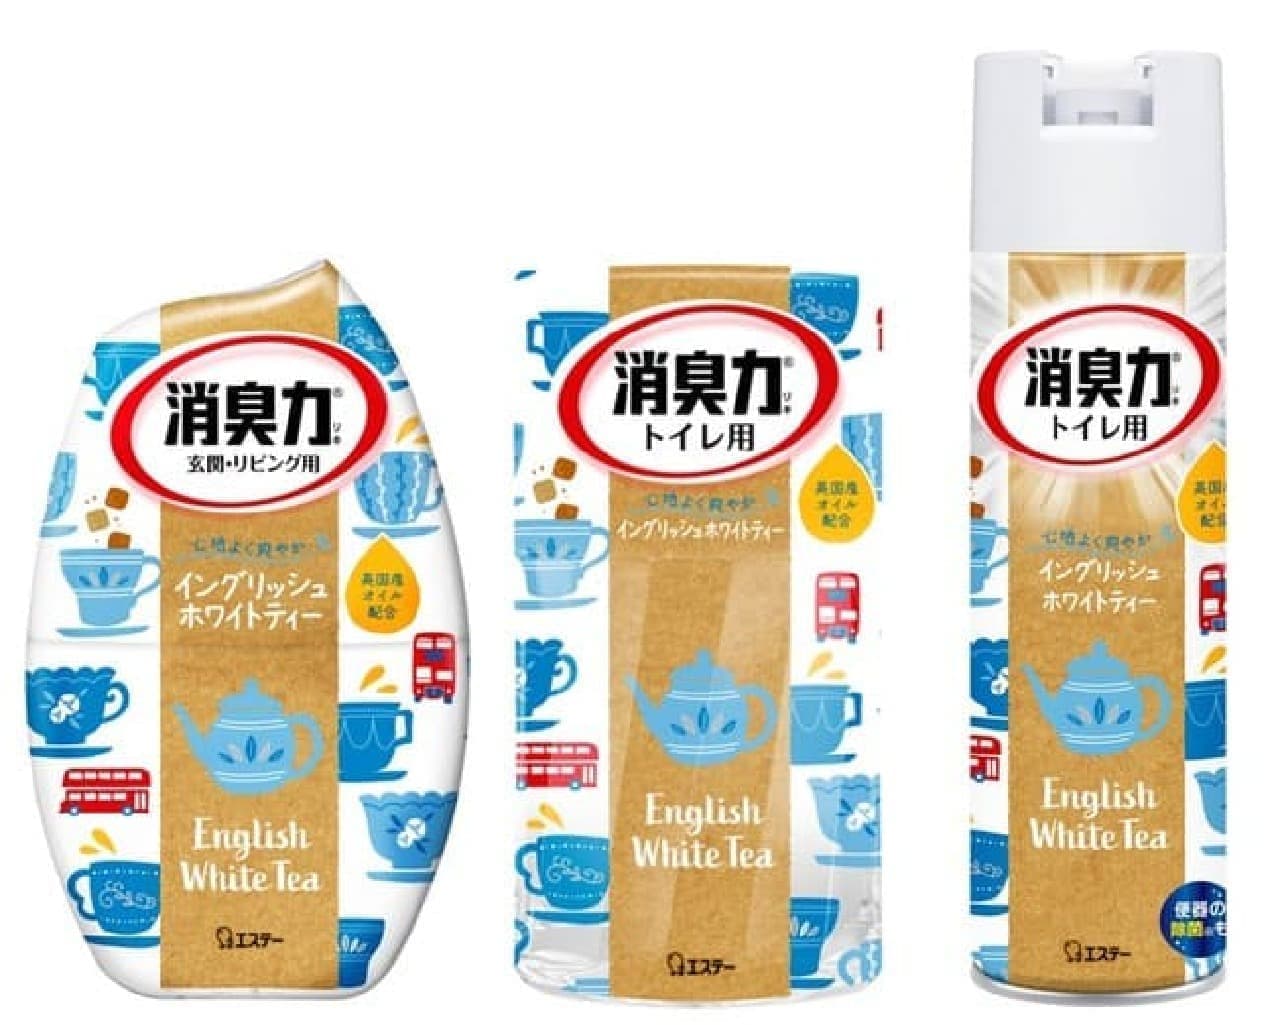 Deodorizing Power for Entrances and Living Rooms" English White Tea Fragrance -- English-style stylish package, also for toilets